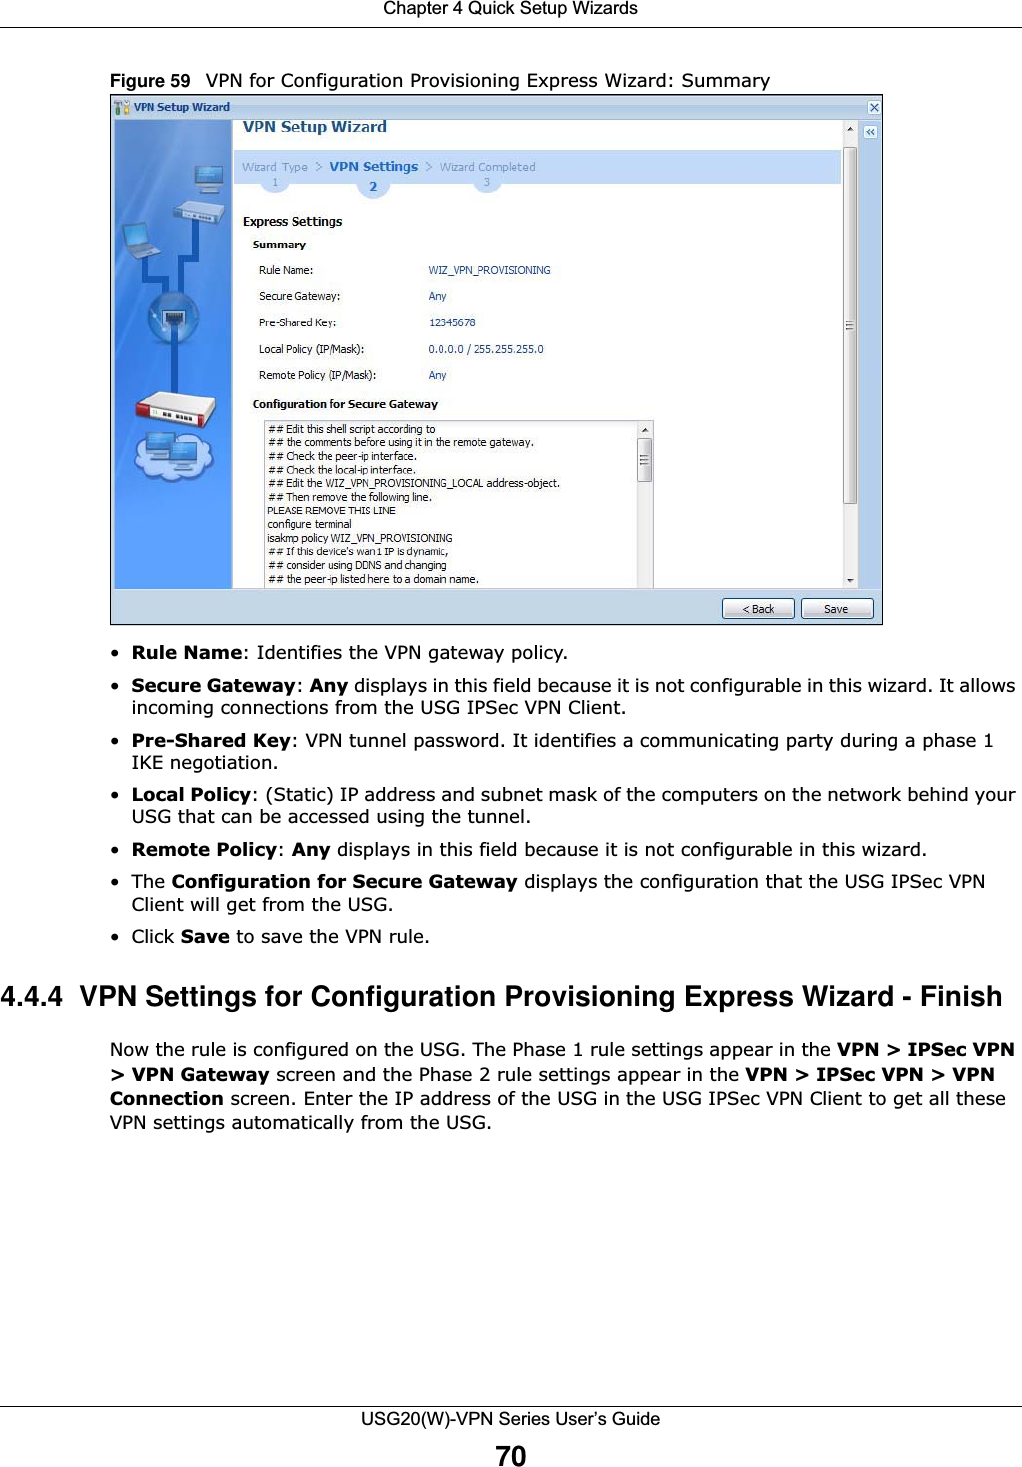 Chapter 4 Quick Setup WizardsUSG20(W)-VPN Series User’s Guide70Figure 59   VPN for Configuration Provisioning Express Wizard: Summary •Rule Name: Identifies the VPN gateway policy.•Secure Gateway: Any displays in this field because it is not configurable in this wizard. It allows incoming connections from the USG IPSec VPN Client.•Pre-Shared Key: VPN tunnel password. It identifies a communicating party during a phase 1 IKE negotiation. •Local Policy: (Static) IP address and subnet mask of the computers on the network behind your USG that can be accessed using the tunnel.•Remote Policy: Any displays in this field because it is not configurable in this wizard.•The Configuration for Secure Gateway displays the configuration that the USG IPSec VPN Client will get from the USG.• Click Save to save the VPN rule.4.4.4  VPN Settings for Configuration Provisioning Express Wizard - Finish Now the rule is configured on the USG. The Phase 1 rule settings appear in the VPN &gt; IPSec VPN &gt; VPN Gateway screen and the Phase 2 rule settings appear in the VPN &gt; IPSec VPN &gt; VPN Connection screen. Enter the IP address of the USG in the USG IPSec VPN Client to get all these VPN settings automatically from the USG.